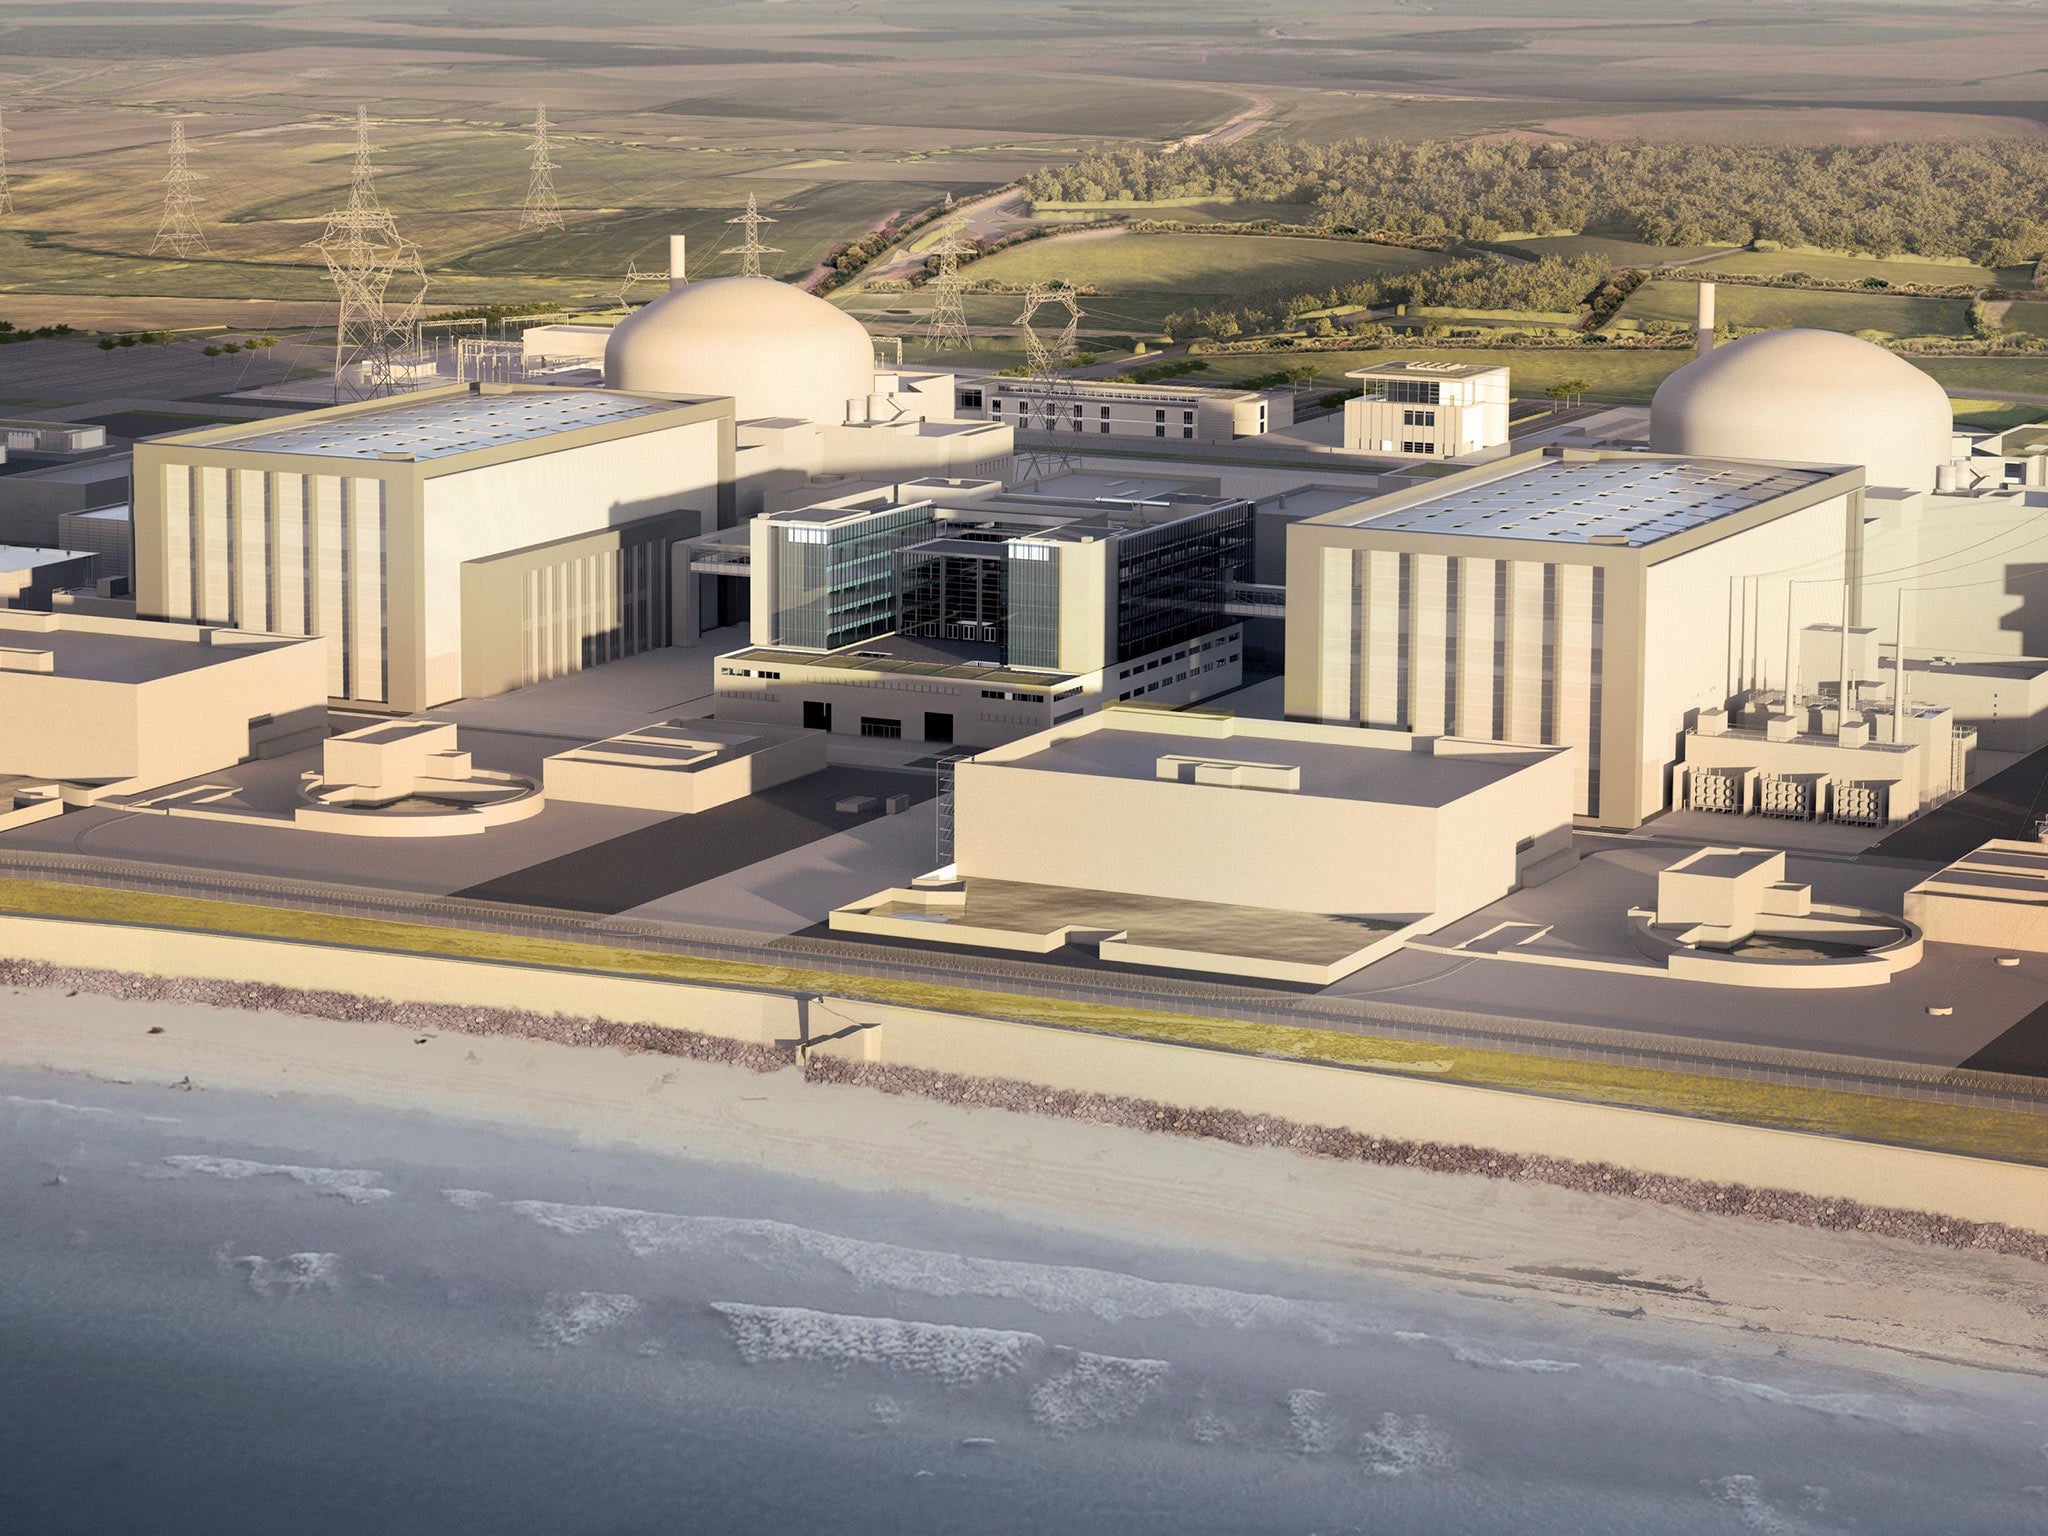 Plans for Hinkley Point were thrown into disarray in April when EDF said it planned to delay the building of the £18 billion nuclear plant